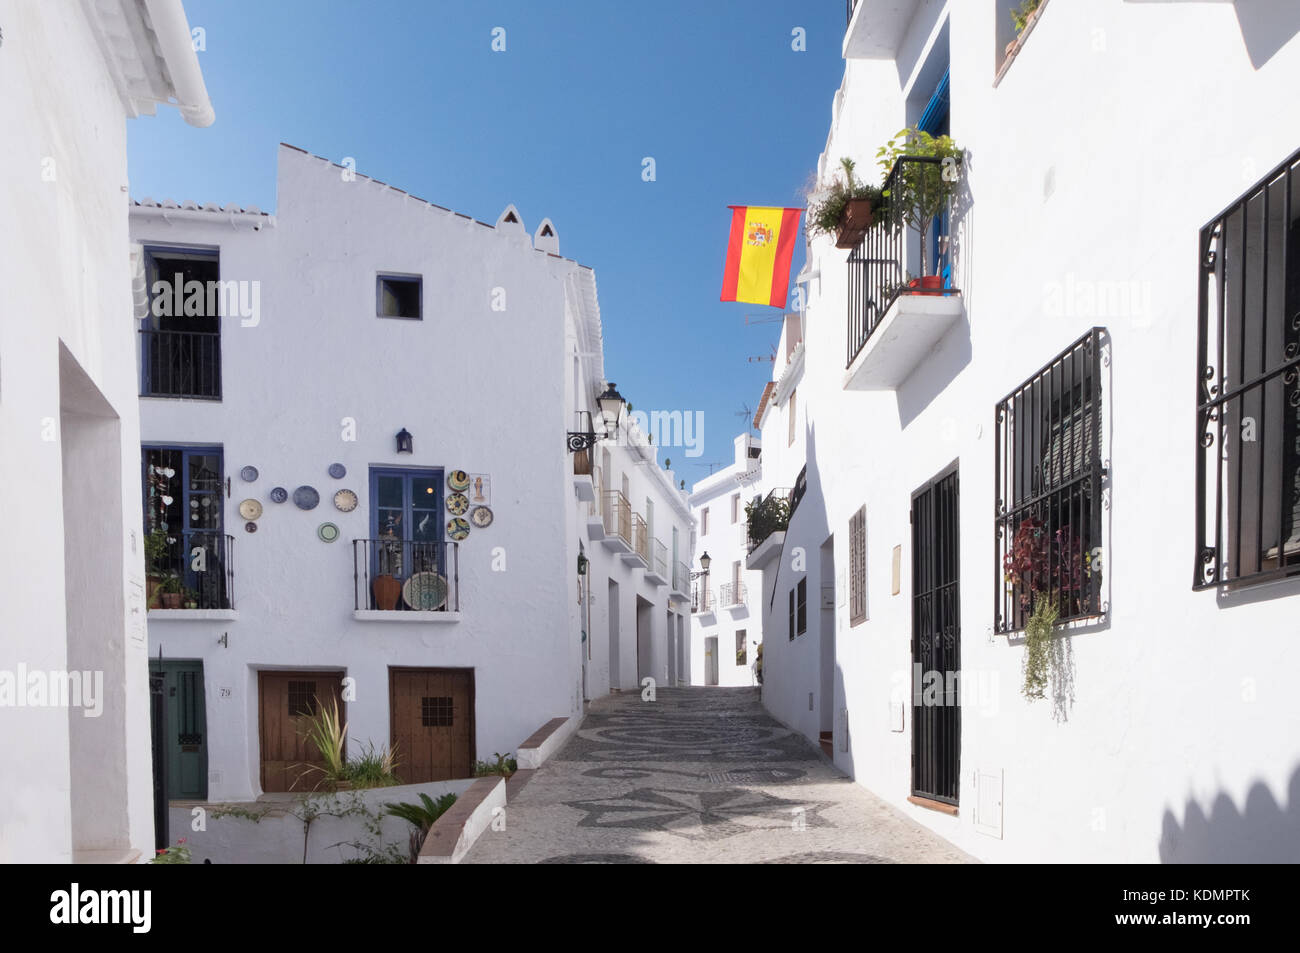 Spanish flag flying in Frigiliana, a popular day trip for visitors to the seaside resorts of the Costa del Sol in southern spain. Stock Photo